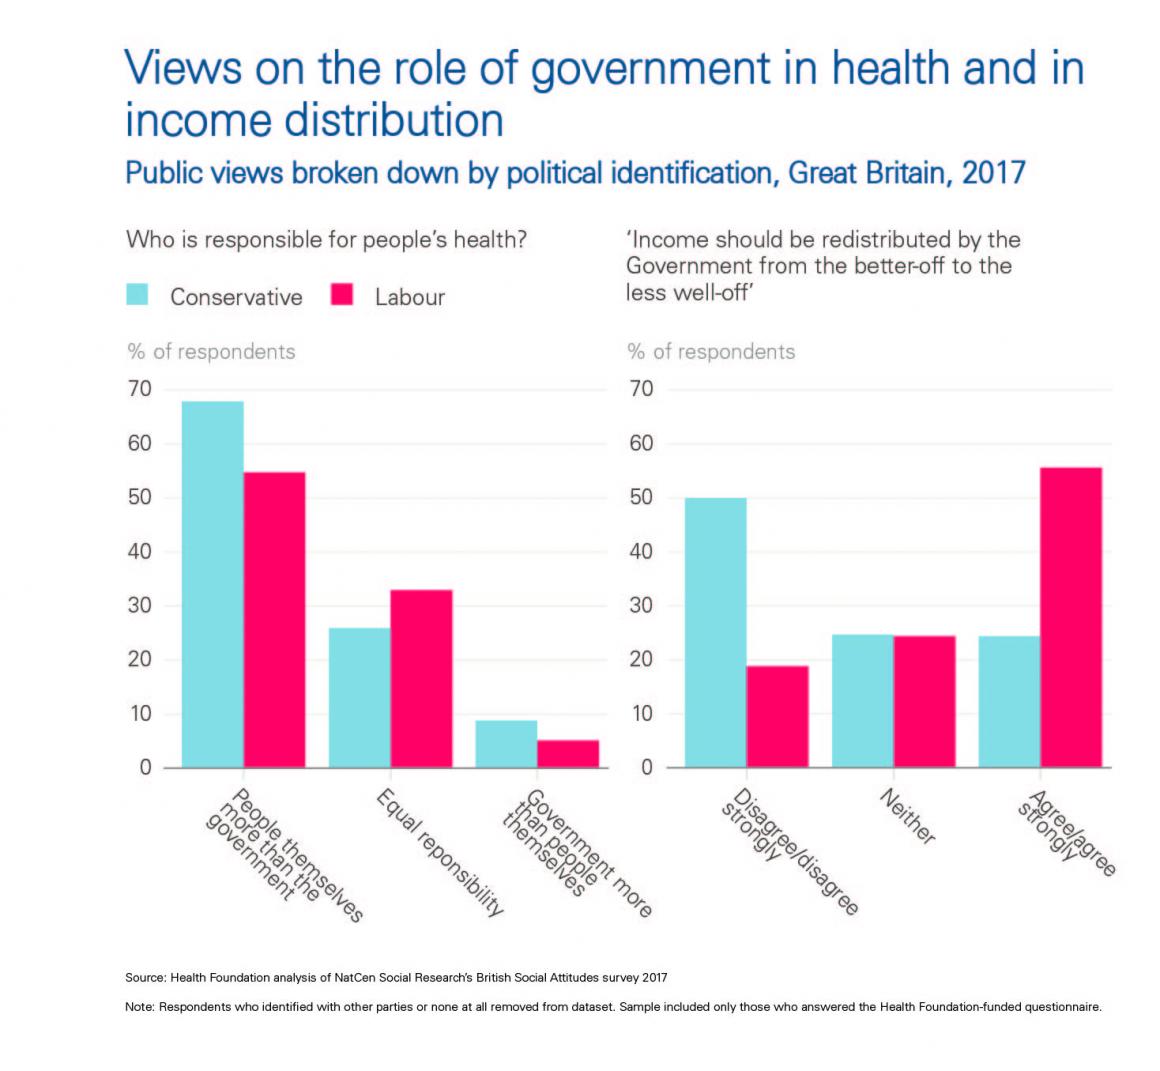 Chart - Views on the role of government in health and income